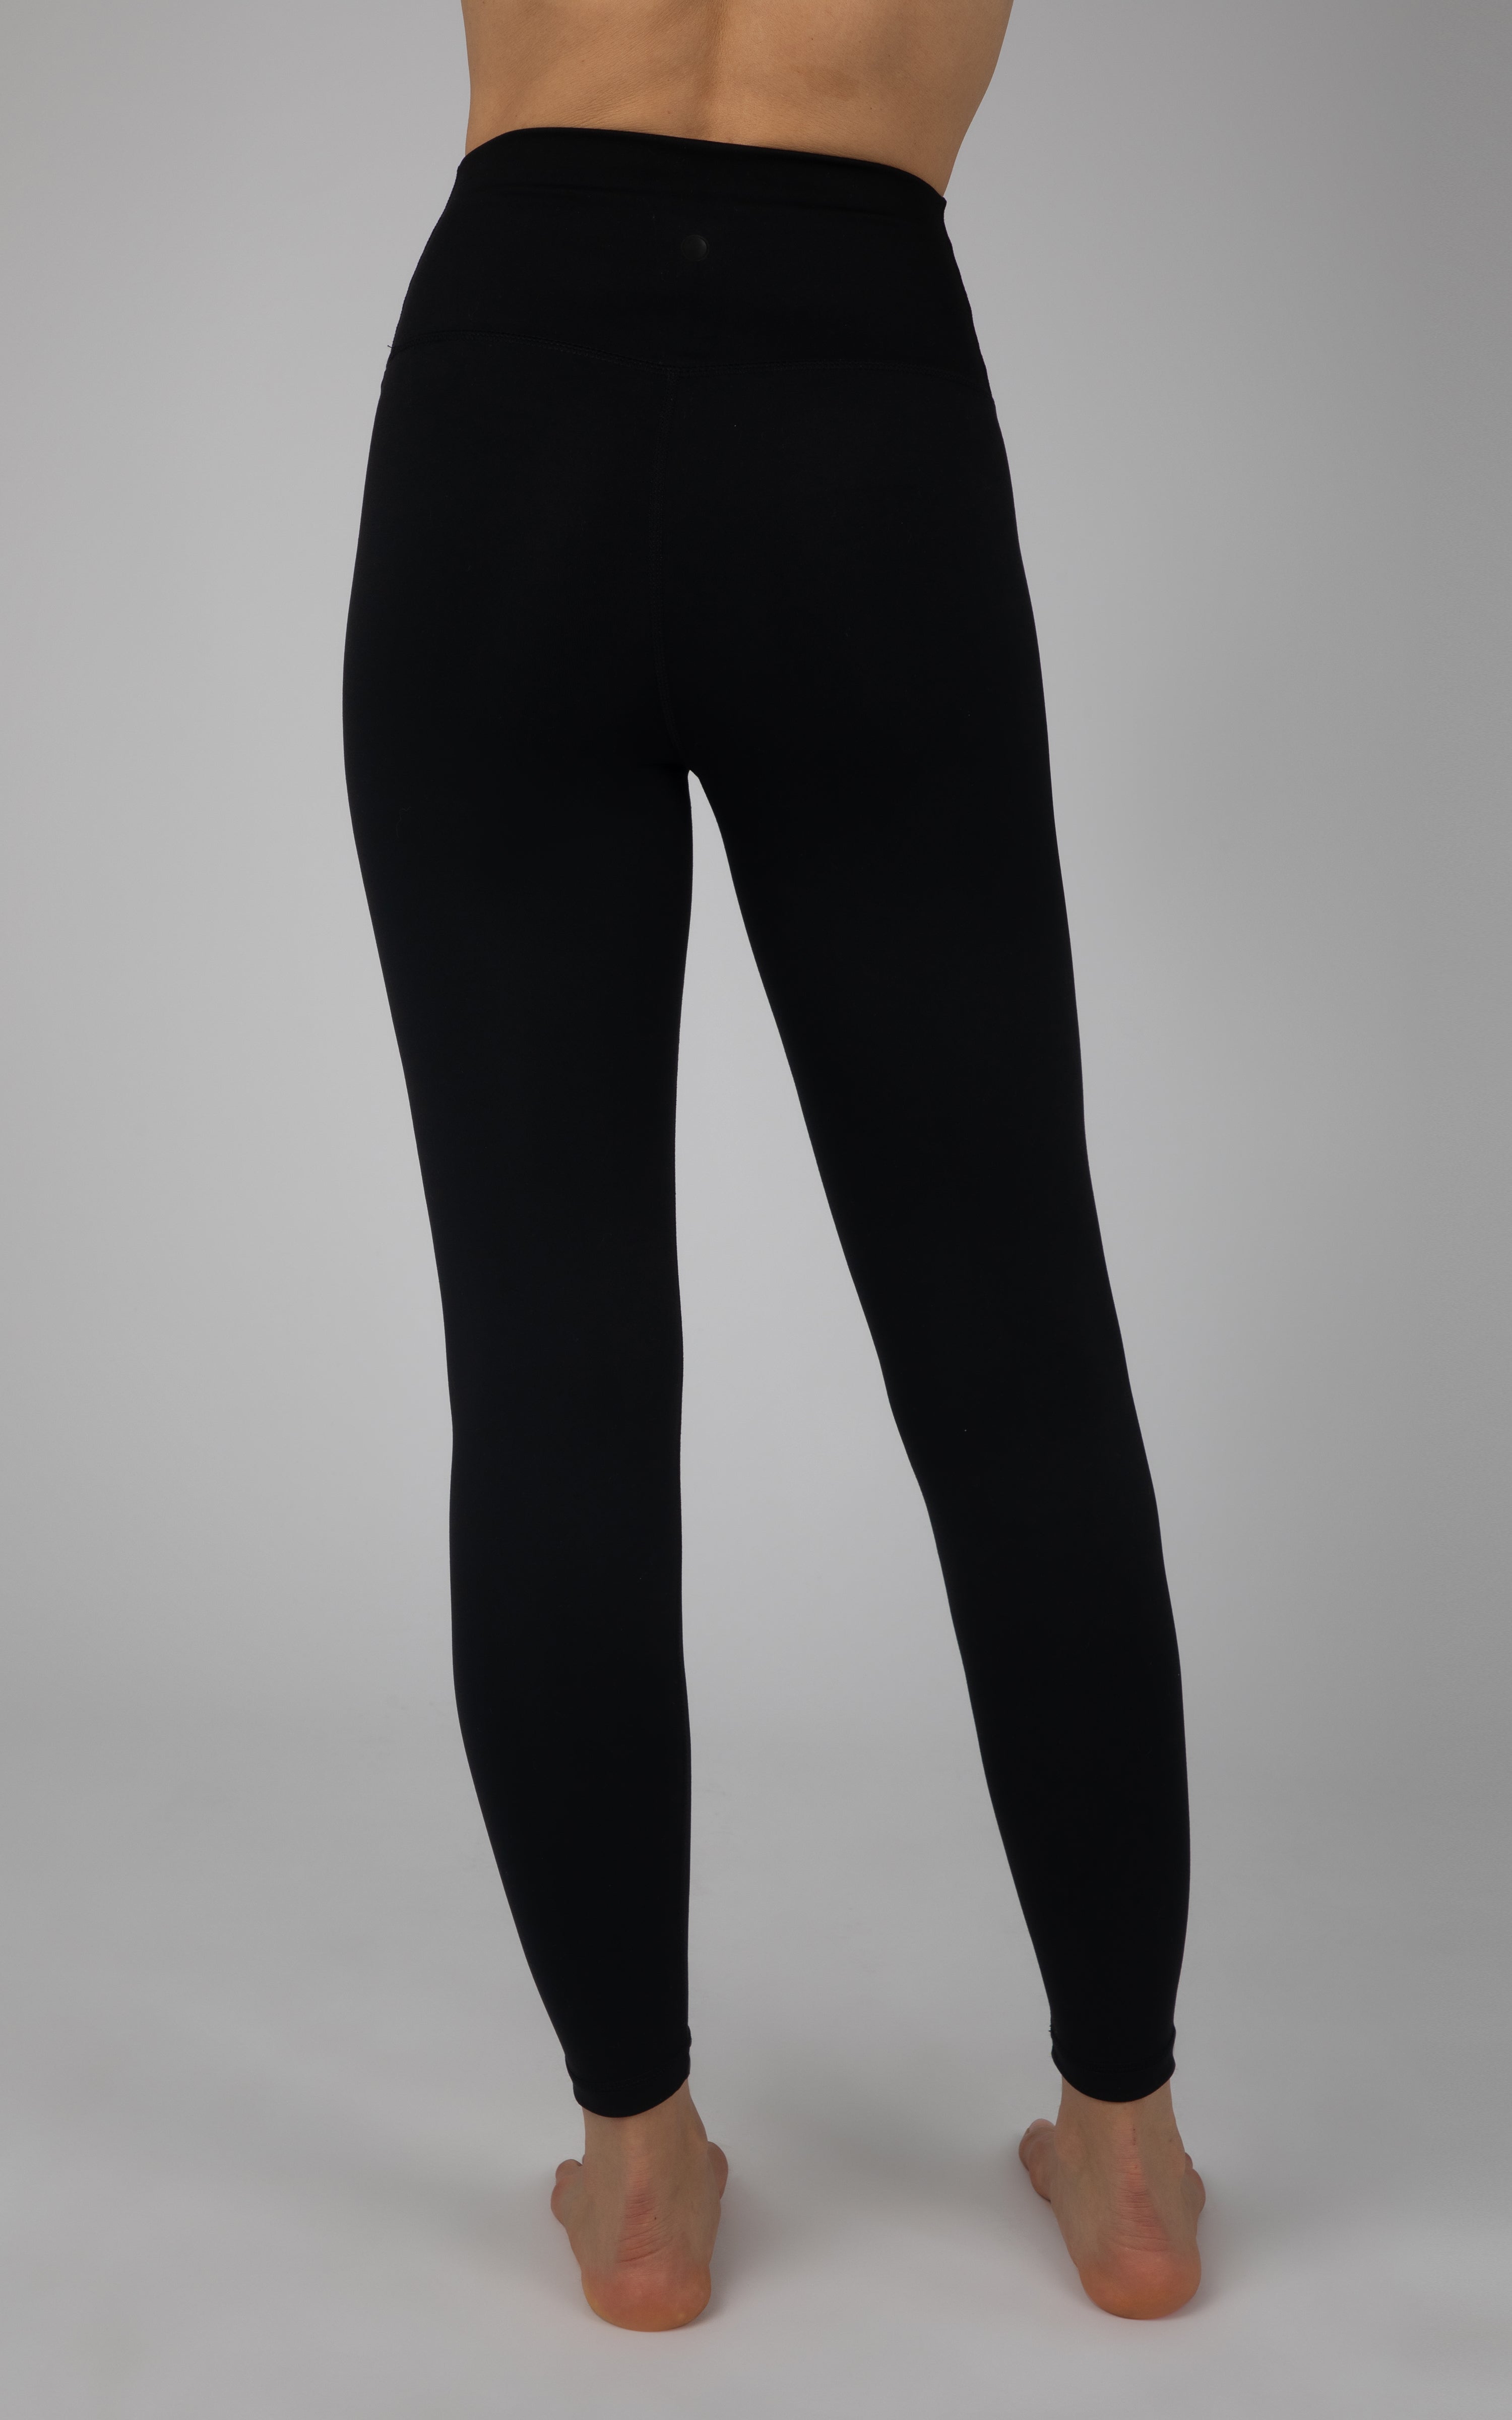 Lux Ballerina Ruched 7/8 Ankle Legging